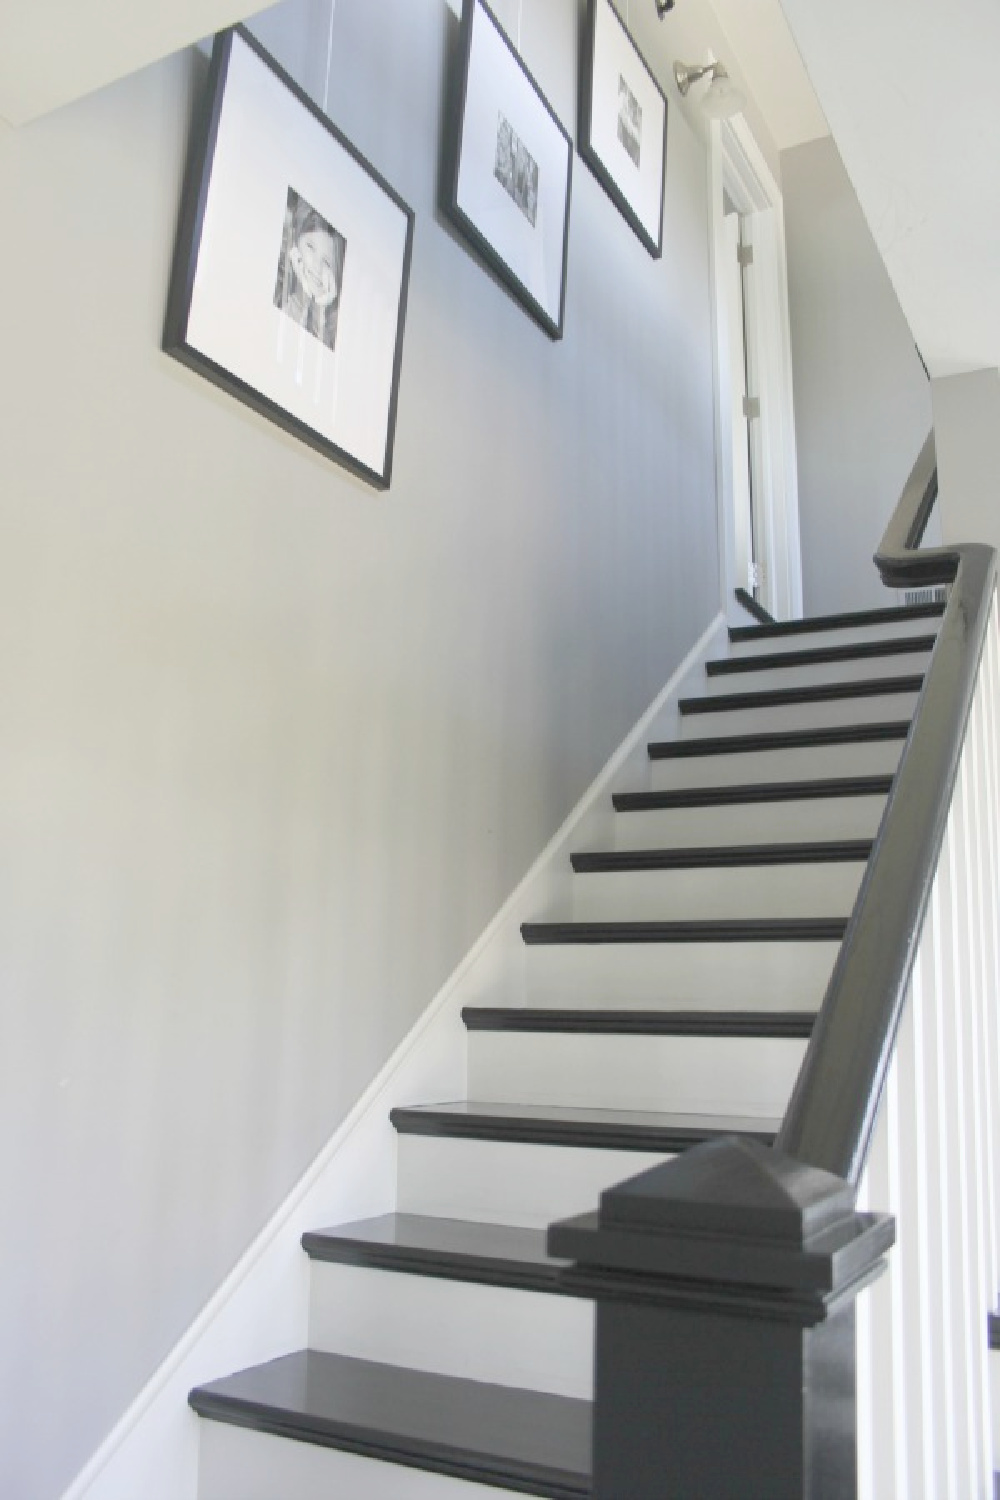 Staircase with black stained hardwoods in a modern farmhouse decor with rustic decor, natural materials and neutral palette. Come see the house tour! #modernfarmhouse #industrialfarmhouse #farmhousestyle #benjaminmoorestoningtongray